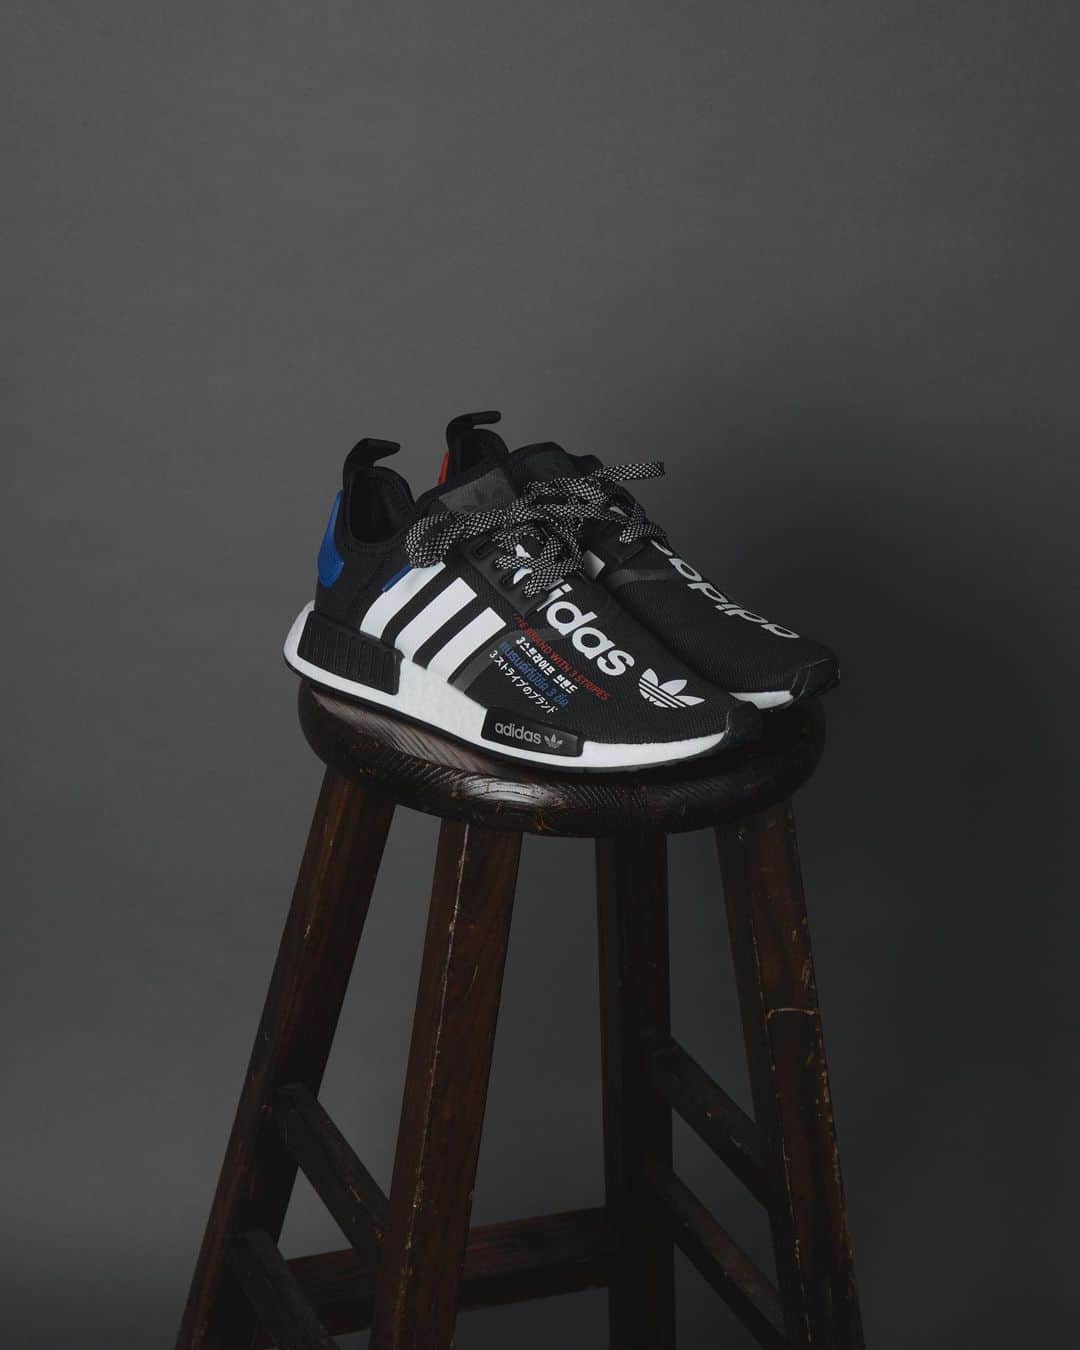 アトモスさんのインスタグラム写真 - (アトモスInstagram)「. 12月5日(土)よりadidas Originals「 NMD R1 TRICOLOR V2 atmos 」を発売します。 EQT SUPPORT ADV、AM4 108、YUNG-1に次ぐ、adidasとatmosのトリコロールコラボレーションの第4弾はNMD R1。前回ファーストカラーが即完売し、今回アップデートされ登場。 1980年代のトレンドアイコンとなった高機能シューズをモダンにしたNMDは、新たなアーカイブになりそうな気配。そんな名作のatmos別注は、ハイプなスニーカーフリークの心を鷲掴みにする。atmosらしさが光るトリコロールカラーをアッパーの文字に配し、左右アシンメトリーのヒールケージを合わせ、atmosの発祥でもある原宿、神宮前交差点の緯度経度を表記し東京から世界へスニーカーカルチャーを発信するatmosのコンセプトを表現、アッパー全体にリフレクター素材を採用することで新しい一面も。NMD R1では定番となりつつあるアッパーのレタリングは本モデルでも健在です。  本商品は2020年12月5日(土)より、atmos各店、atmos-tokyo.comにて発売いたします。 . Adidas Originals "NMD R1 TRICOLOR V2 atmos" will be on sale from Saturday, December 5th. Following EQT SUPPORT ADV, AM4 108, and YUNG-1, the fourth tricolor collaboration between adidas and atmos is NMD R1. The first color was sold out immediately last time, and this time it has been updated.NMD, which is a modernization of high-performance shoes that became a trend icon in the 1980s, seems to be a new archive. Such a masterpiece atmos bespoke grabs the heart of a hype sneaker freak. The tricolor color that shines like atmos is placed on the upper letters, the heel cages of left and right asymmetry are matched, the latitude and longitude of Harajuku and Jingumae intersection, which is also the origin of atmos, is indicated, and the concept of atmos that transmits sneaker culture from Tokyo to the world A new side is also created by adopting a reflector material for the expression and the entire upper. The upper lettering, which is becoming a standard in NMD R1, is still alive in this model. This product will be on sale at atmos stores and atmos-tokyo.com from Saturday, December 5, 2020,  .  #atmos #adidasoriginals #nmdr1 #アトモス」12月4日 11時12分 - atmos_japan